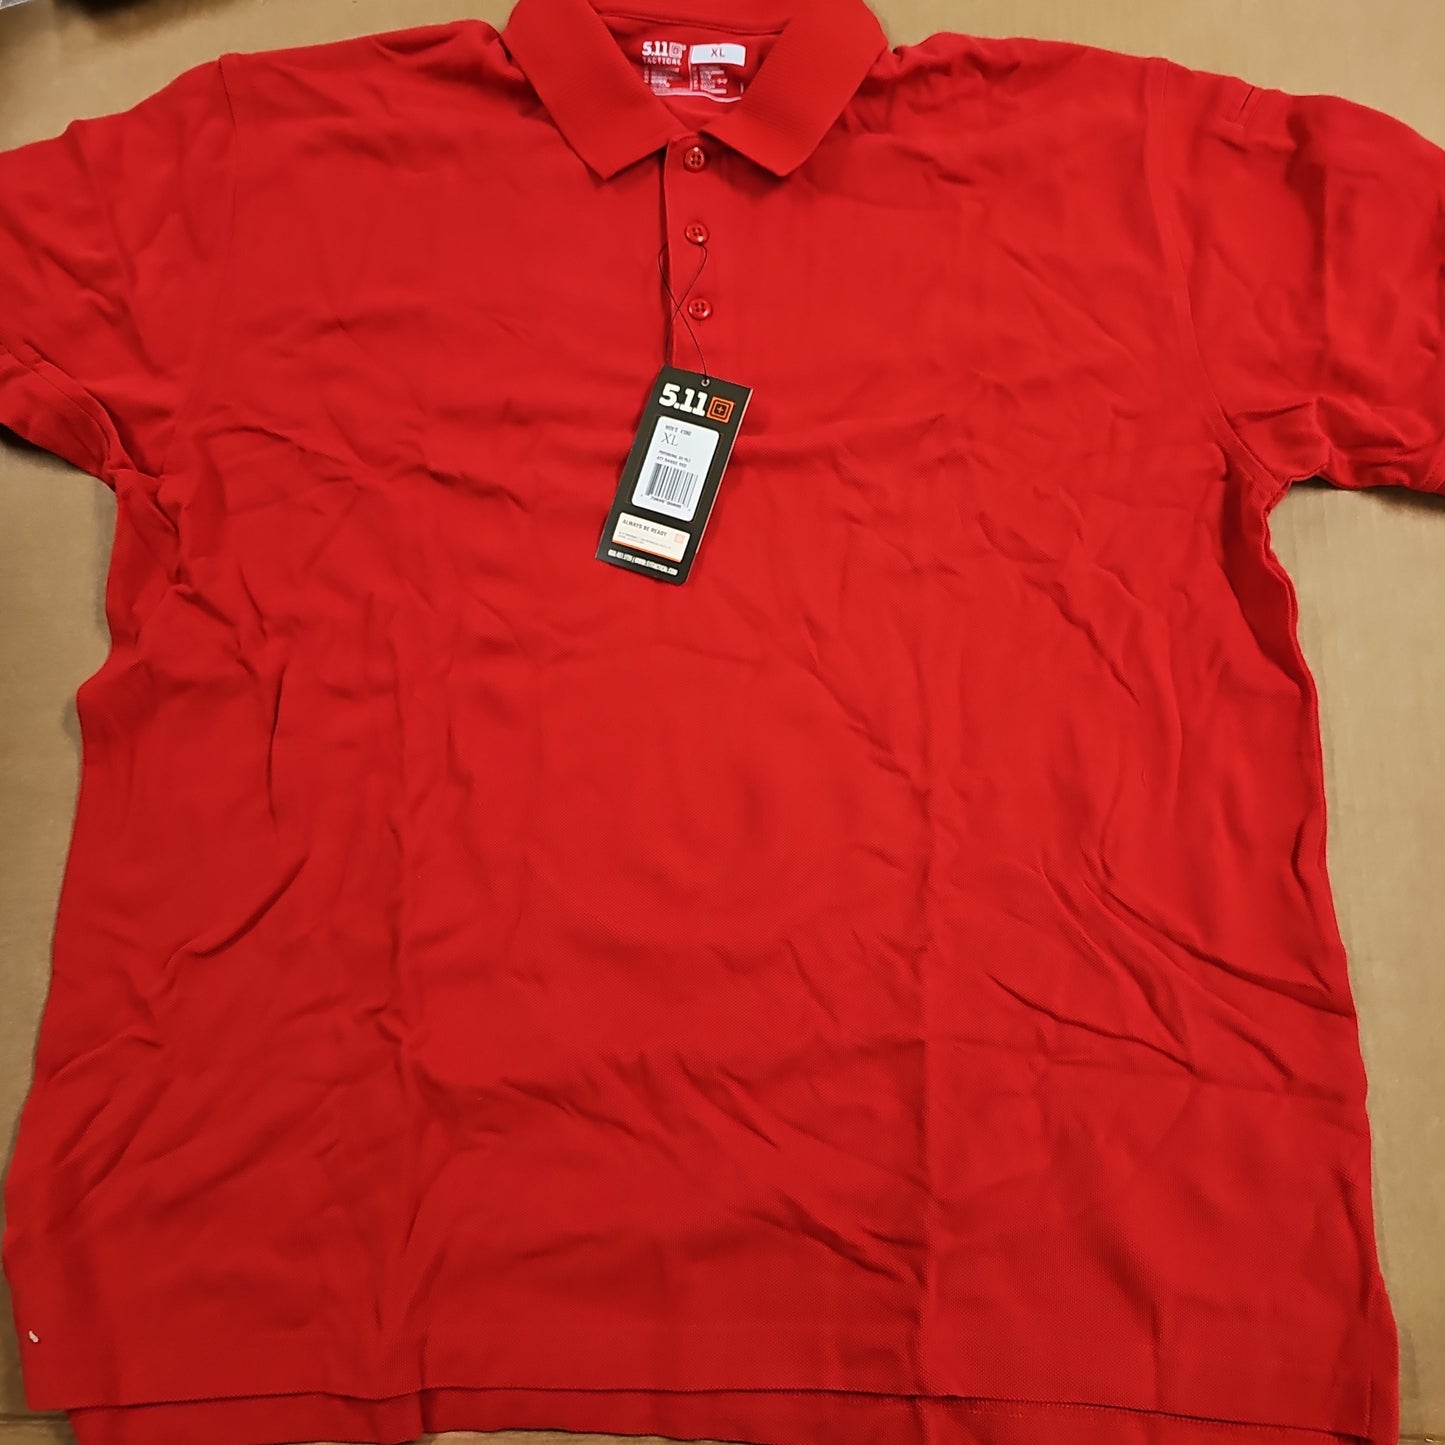 5.11 Tactical Polo Shirt Short Sleeve Professional Red X-LARGE 41060-477-XL